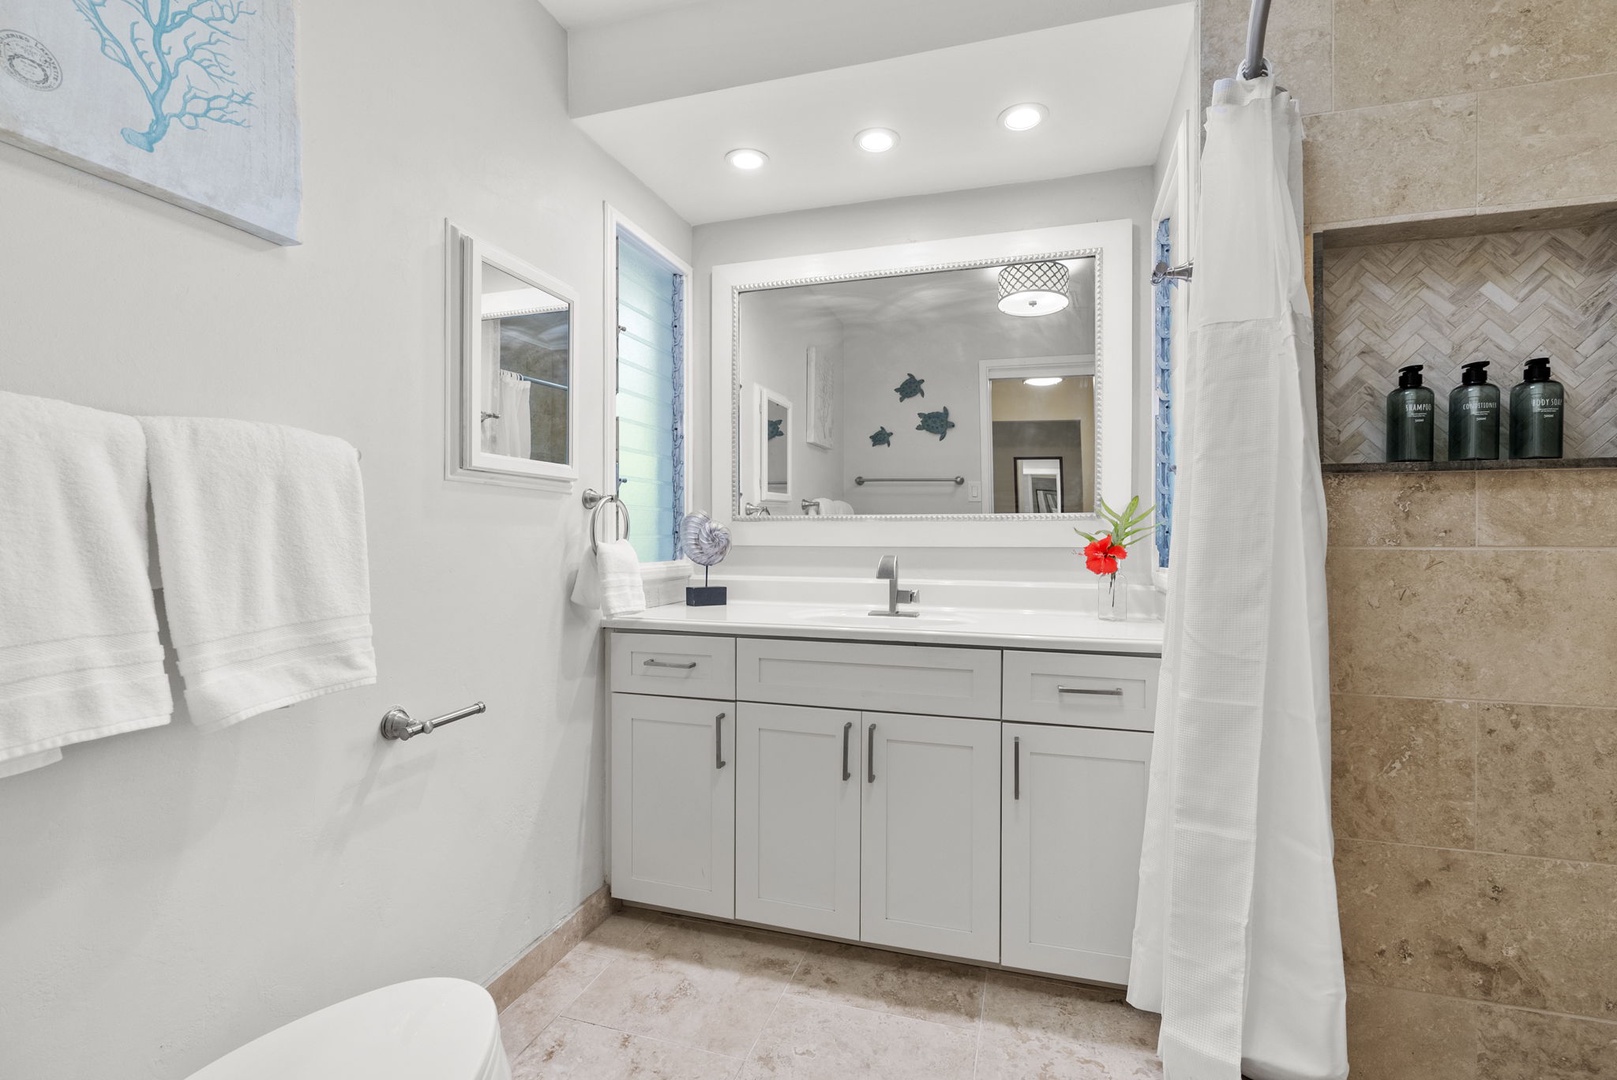 Kailua Vacation Rentals, Hale Aloha - Ensuite bath featuring a generously spaced vanity for added convenience.